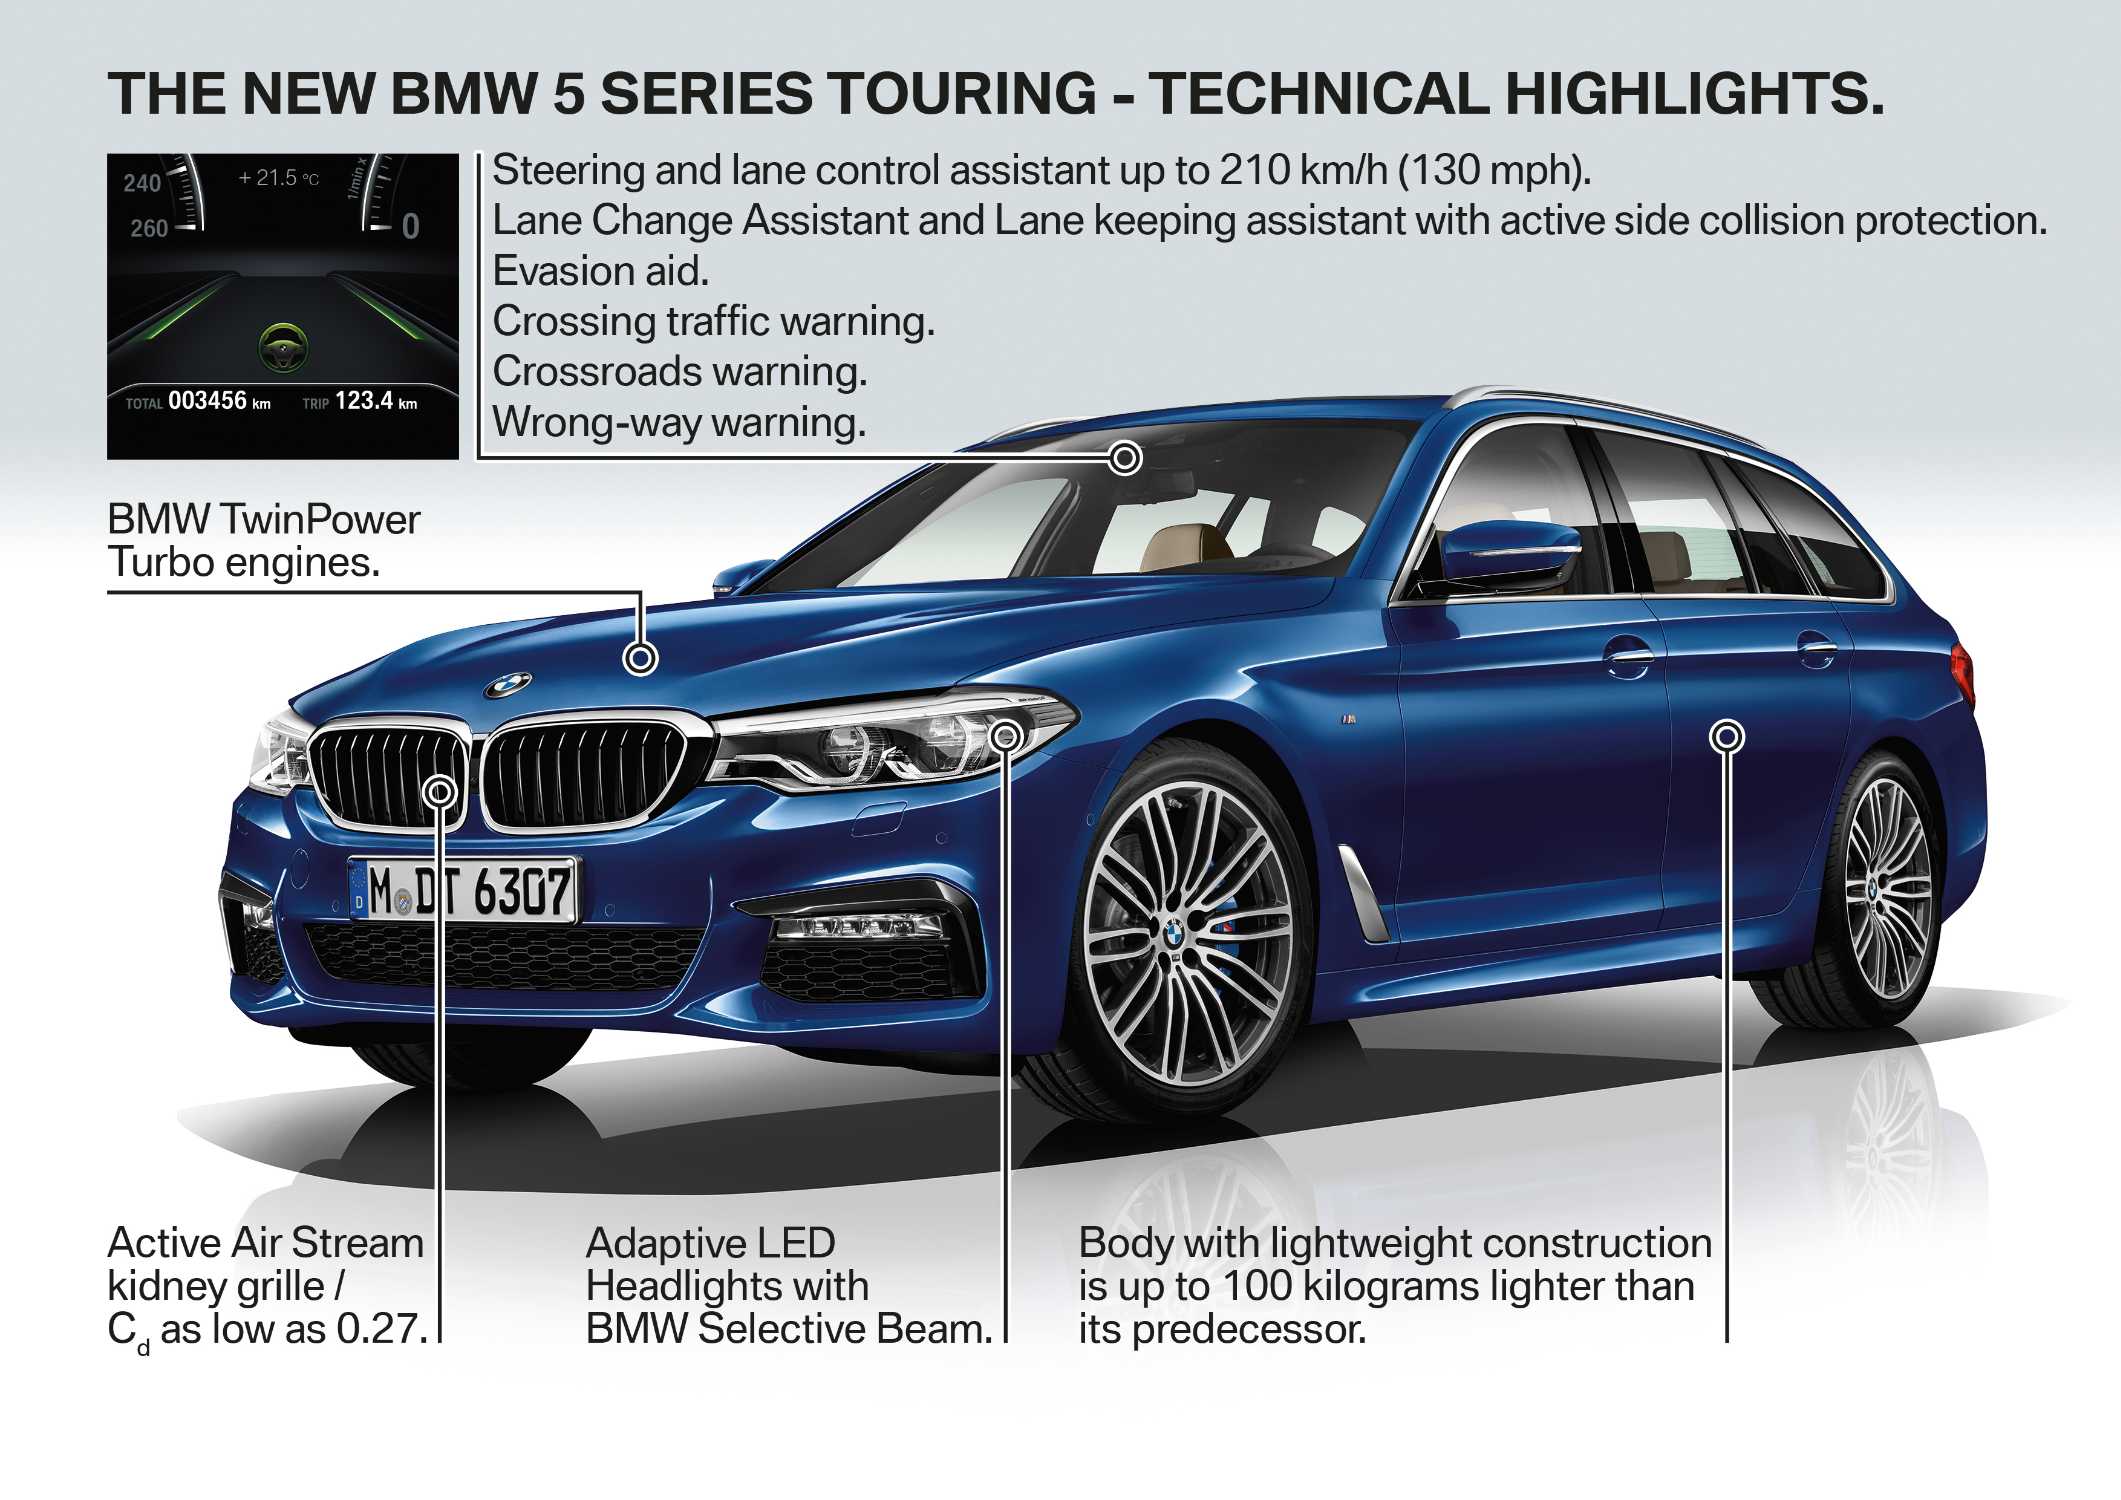 The new BMW 5 Series Touring; BMW 530d xDrive Touring (02/2017).